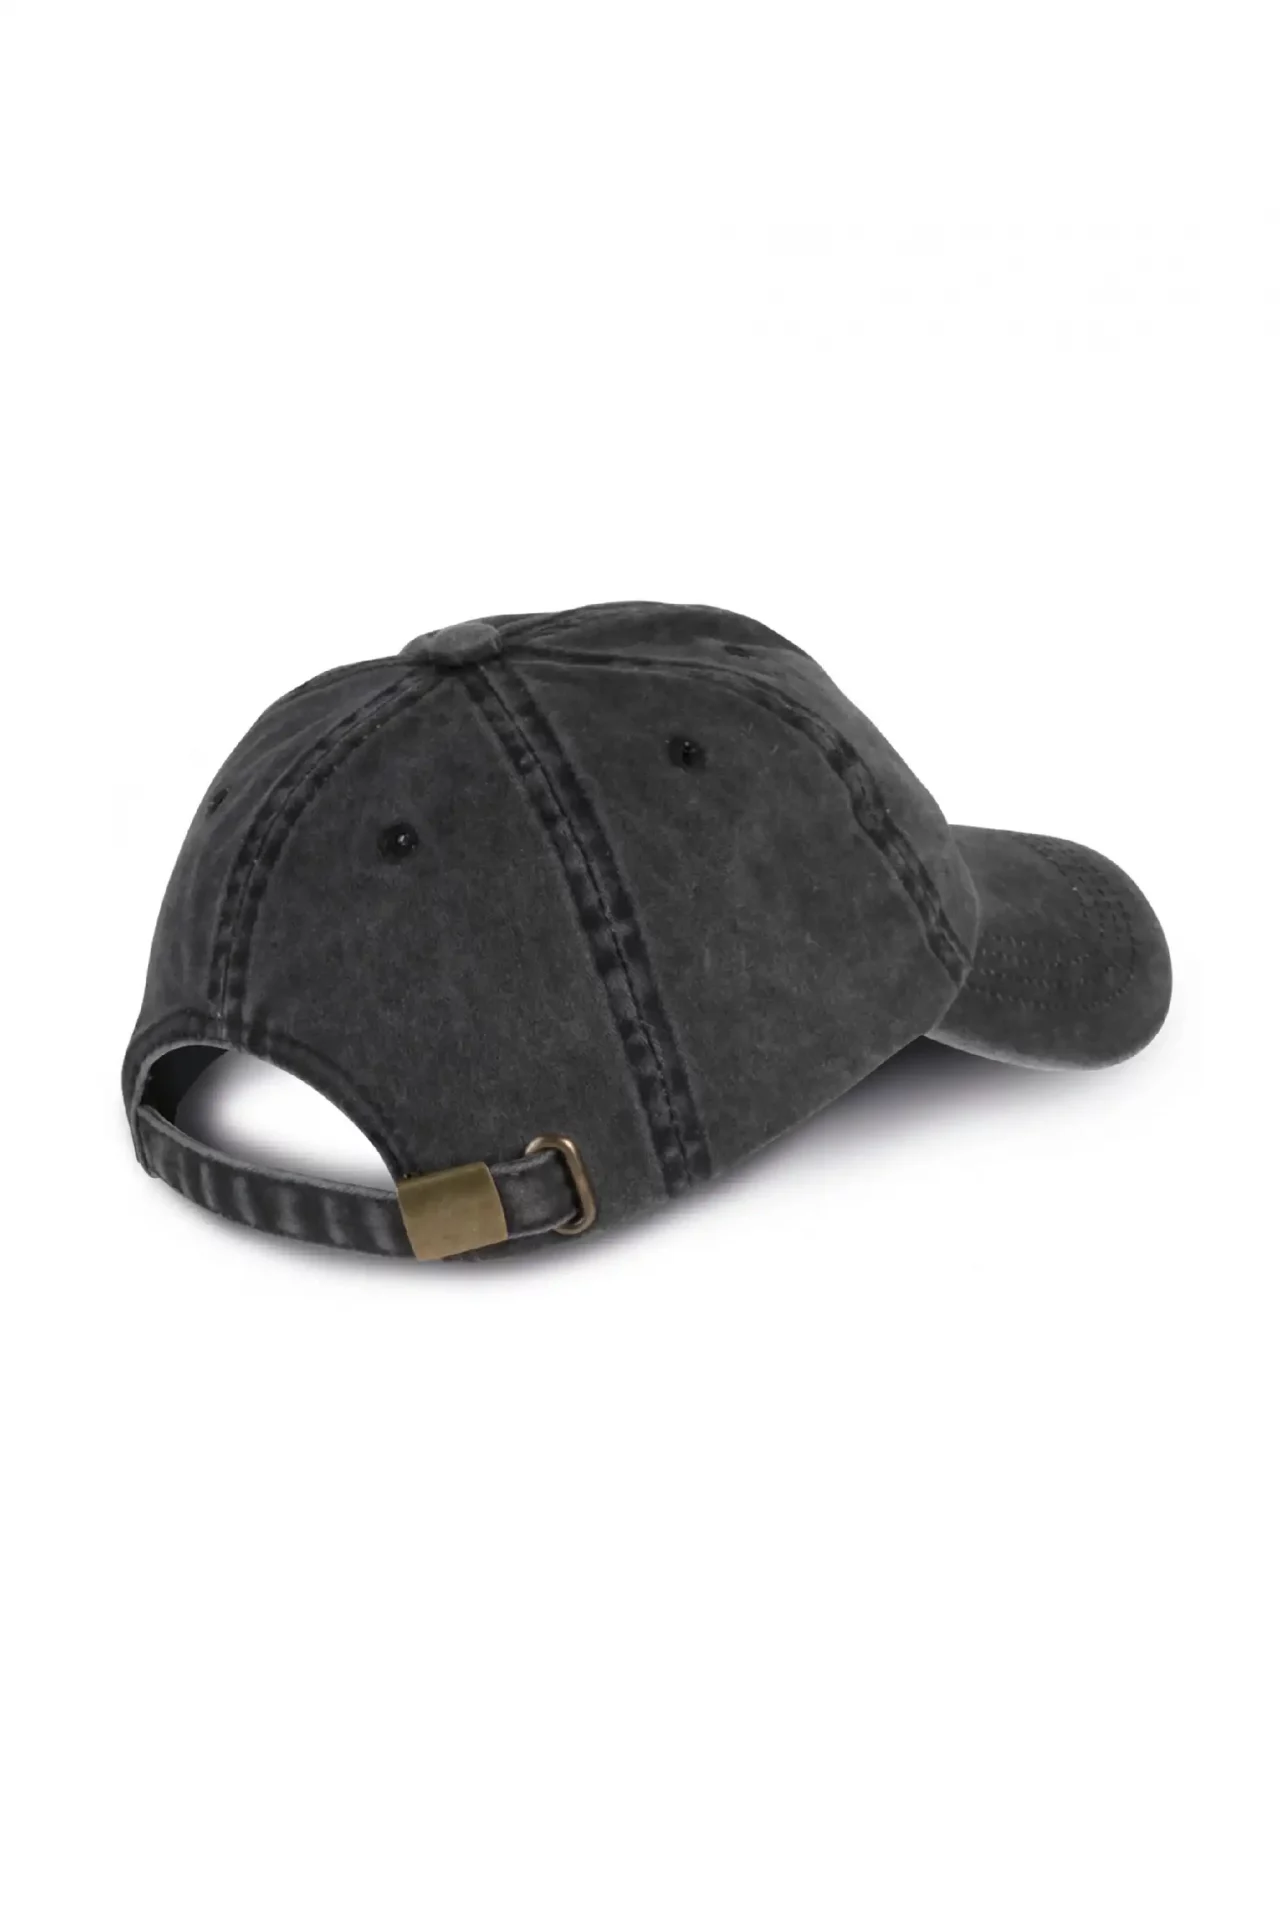 Vintage black cap from the back